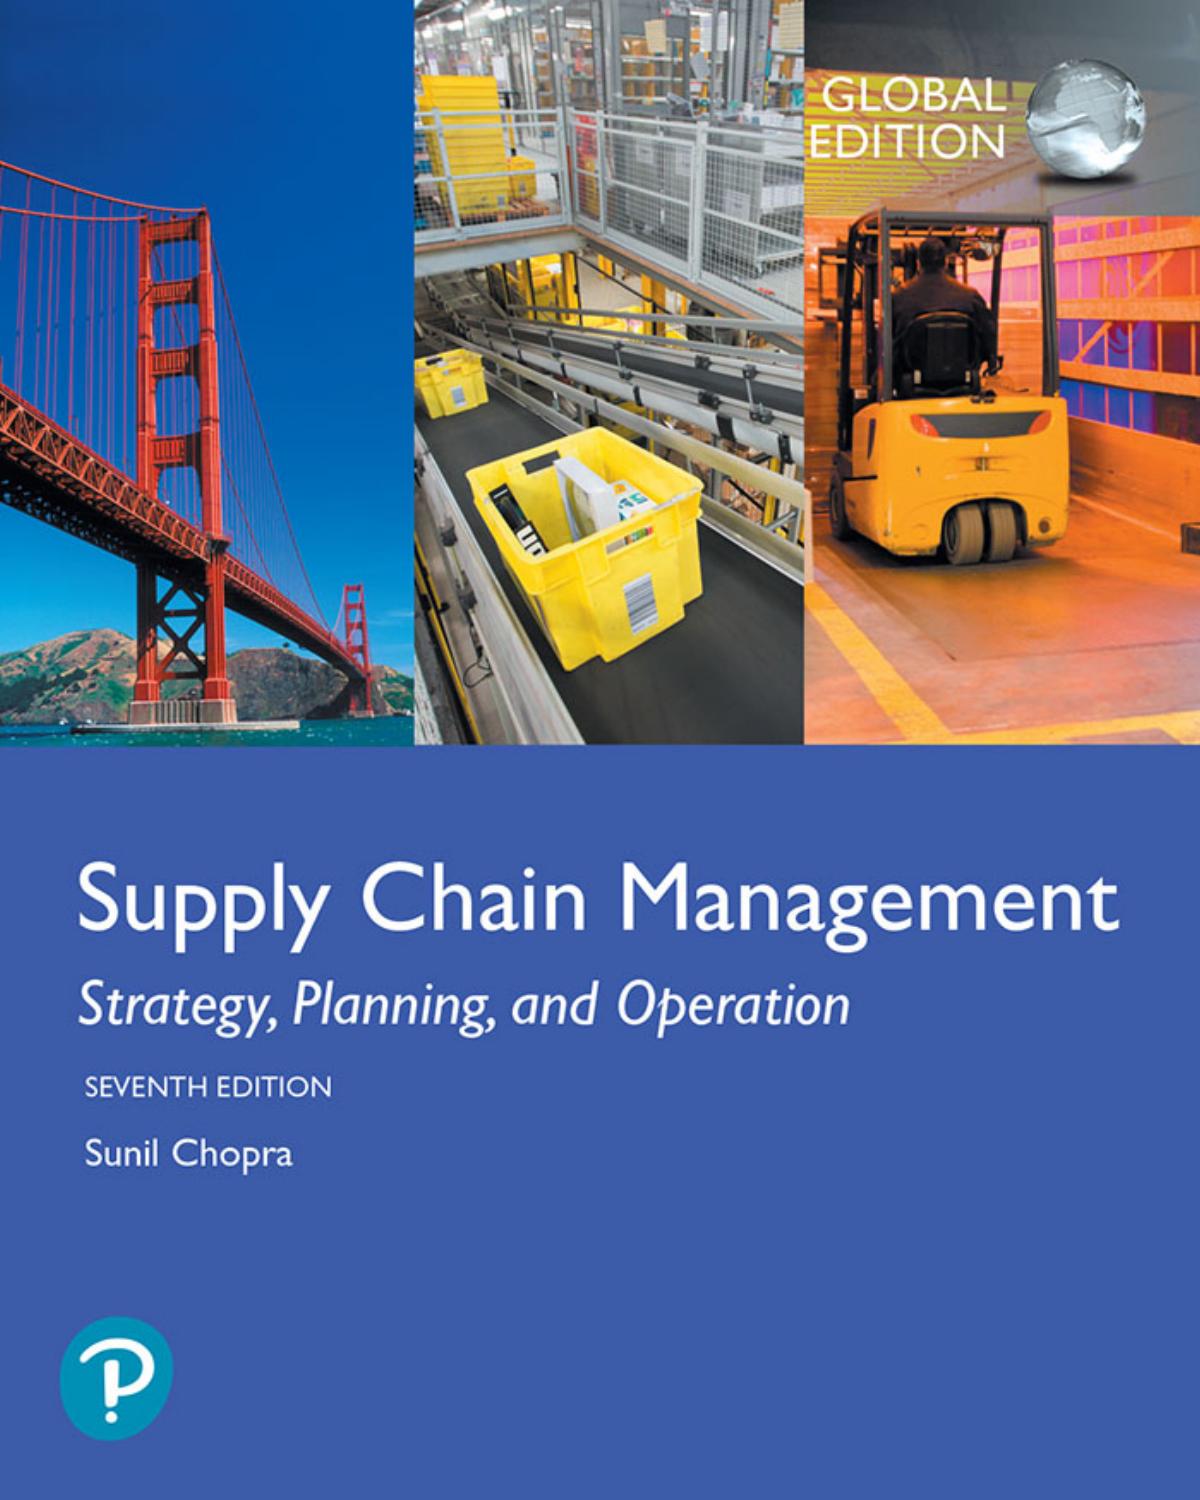 (eBook PDF)Supply Chain Management: Strategy, Planning, and Operation 7th Global Edition by Sunil Chopra